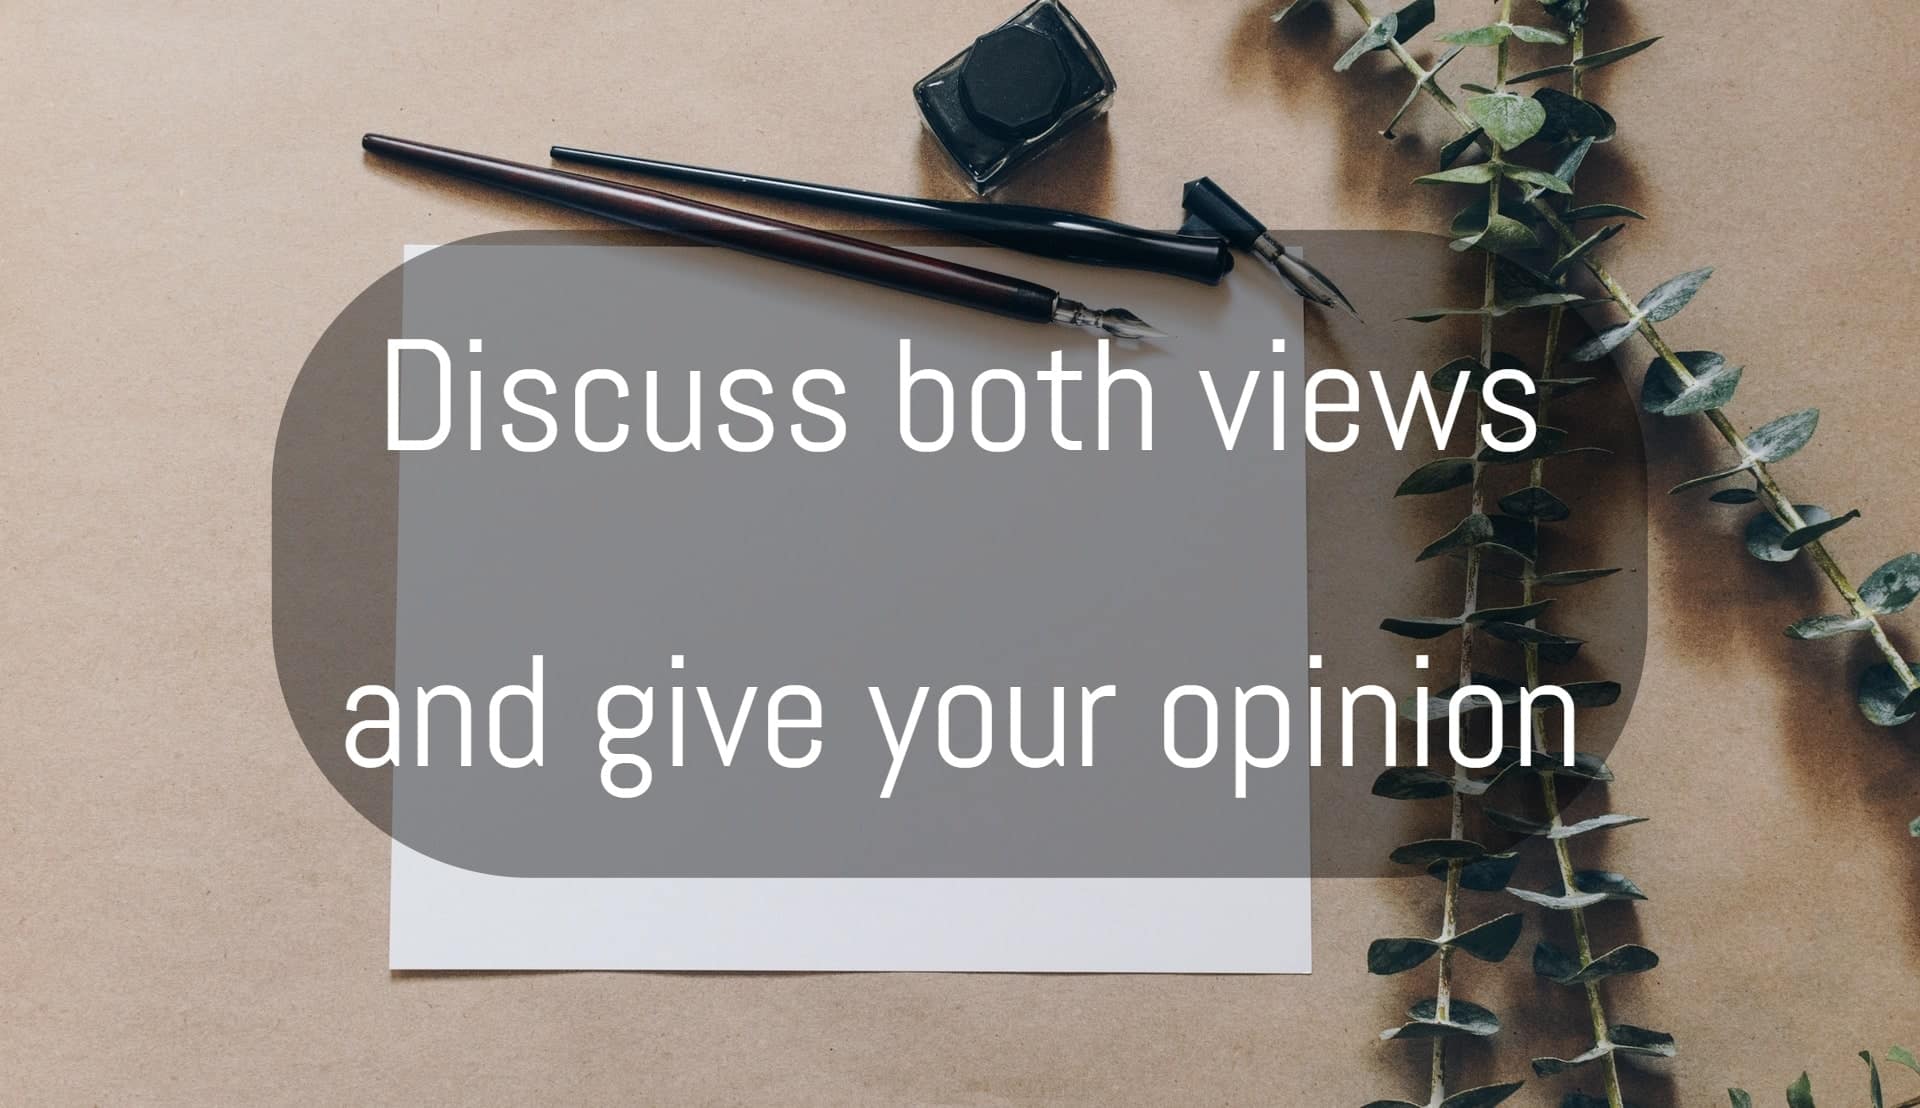 Discuss both views and give your opinion